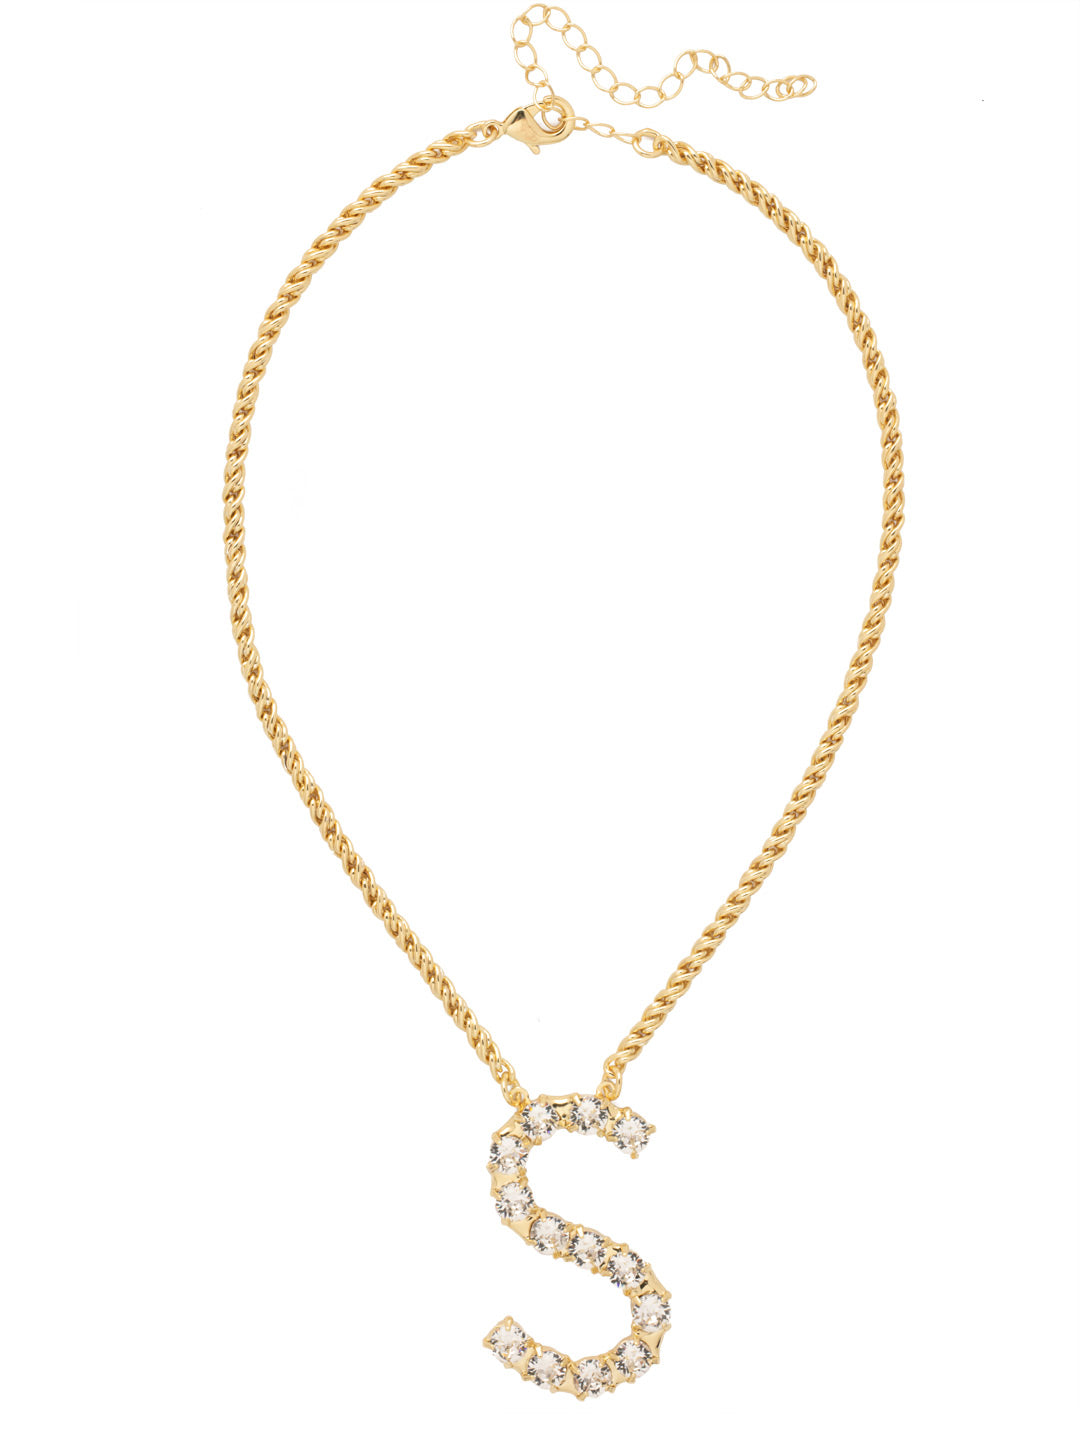 S Initial Rope Pendant Necklace - NFK38BGCRY - <p>The Initial Rope Pendant Necklace features a crystal encrusted metal monogram pendant on an adjustable rope chain, secured with a lobster claw clasp. From Sorrelli's Crystal collection in our Bright Gold-tone finish.</p>